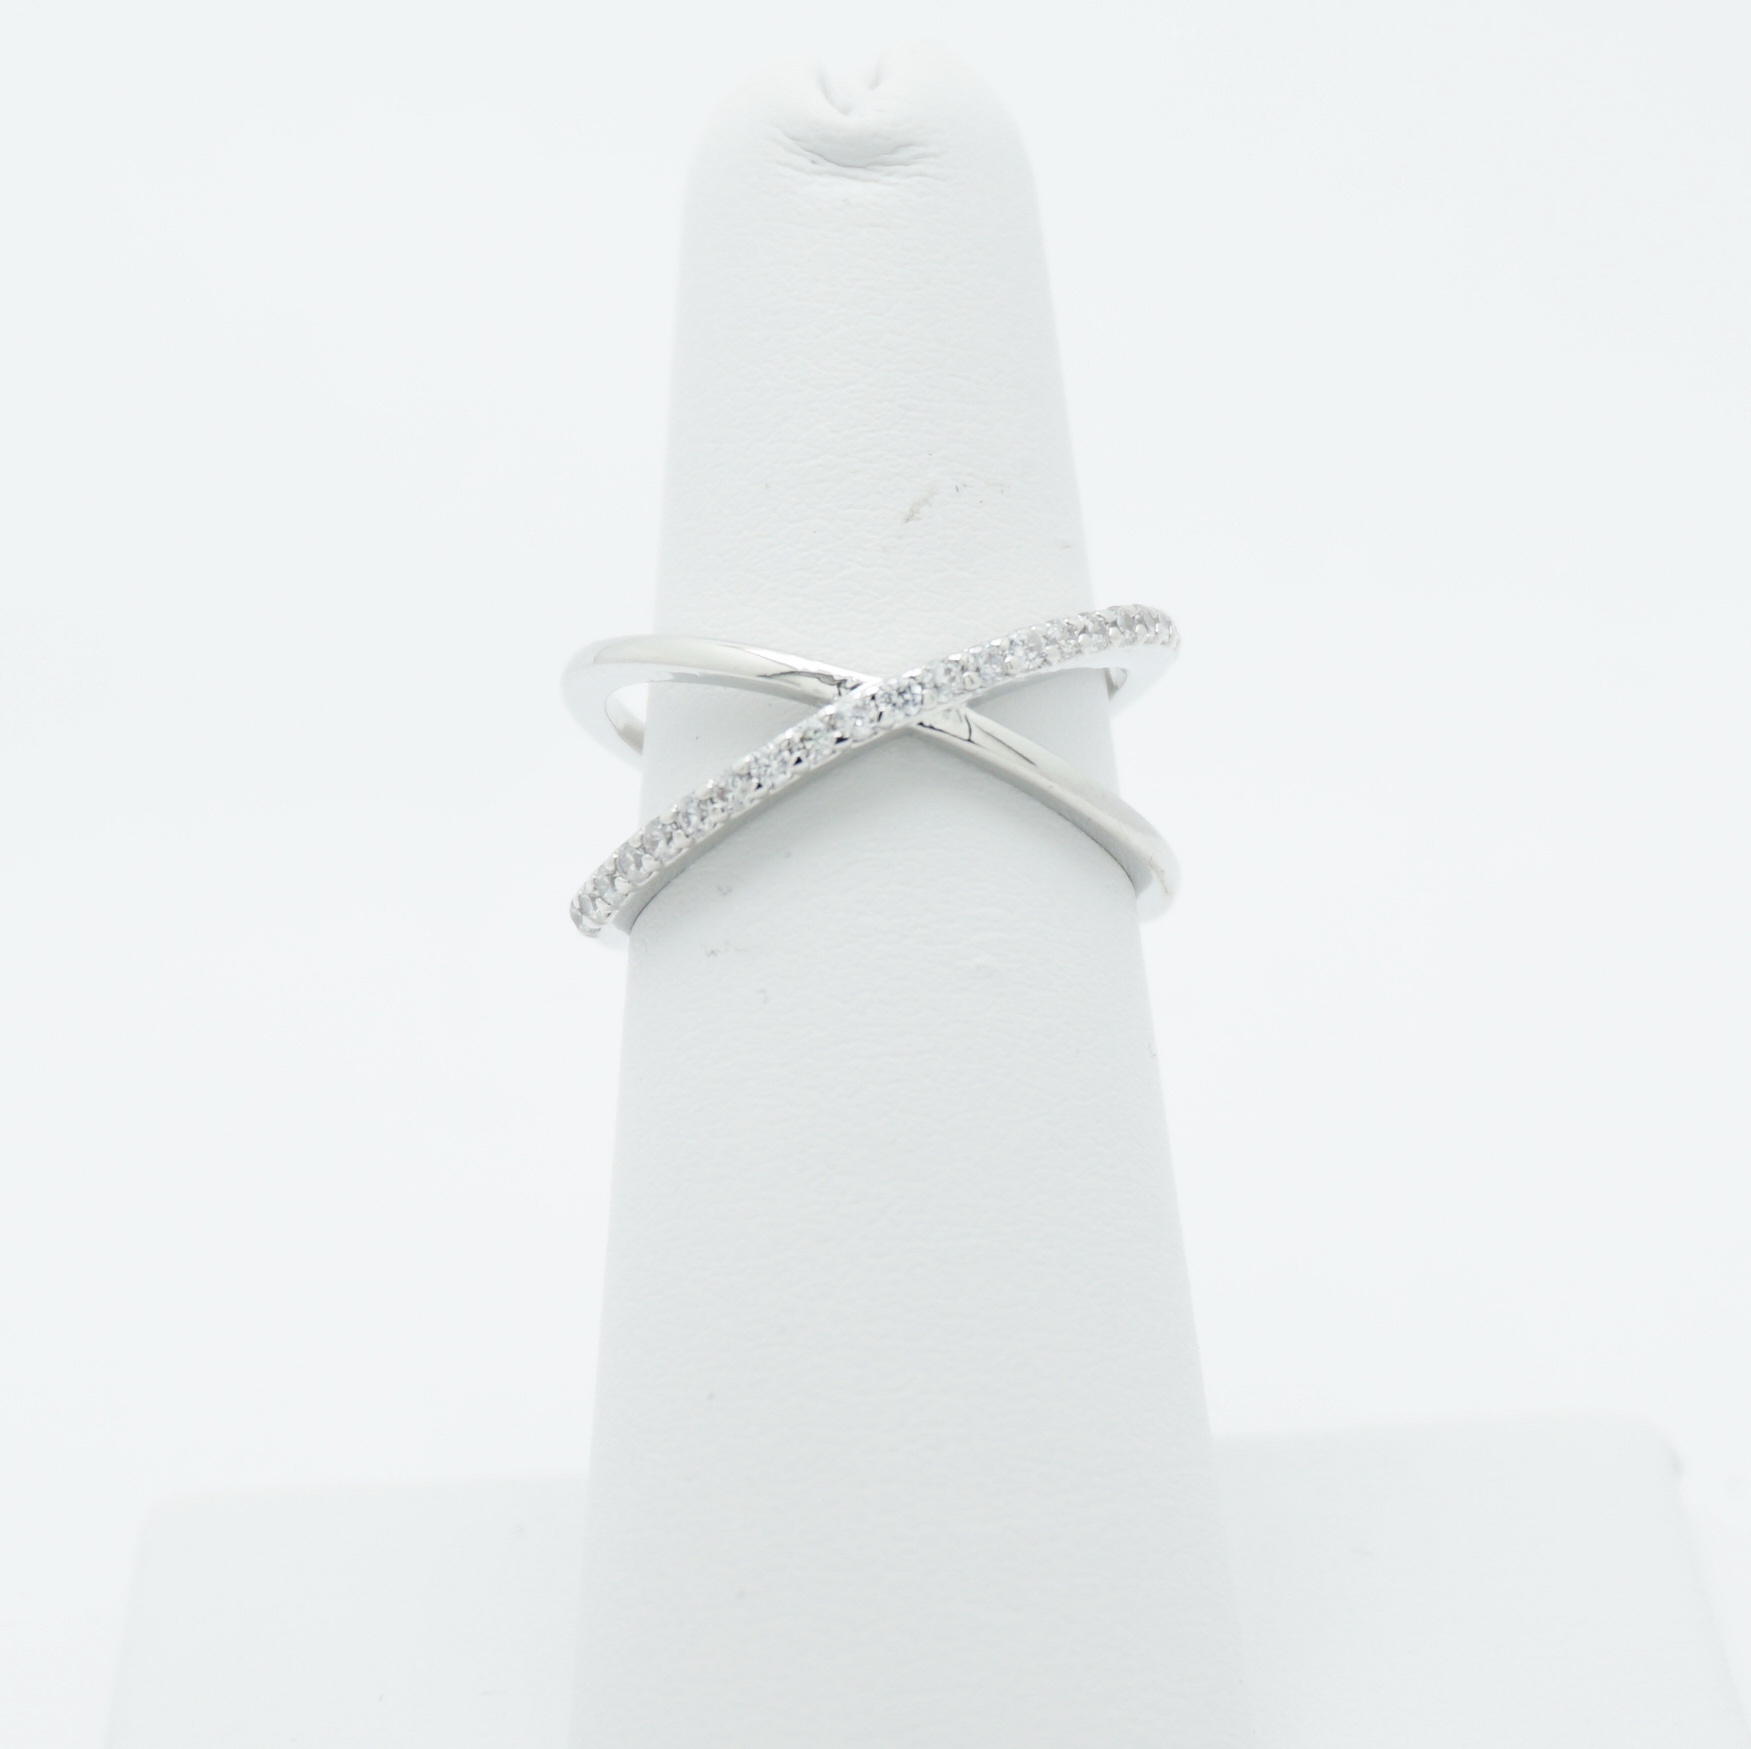 X Band Ring in Silver